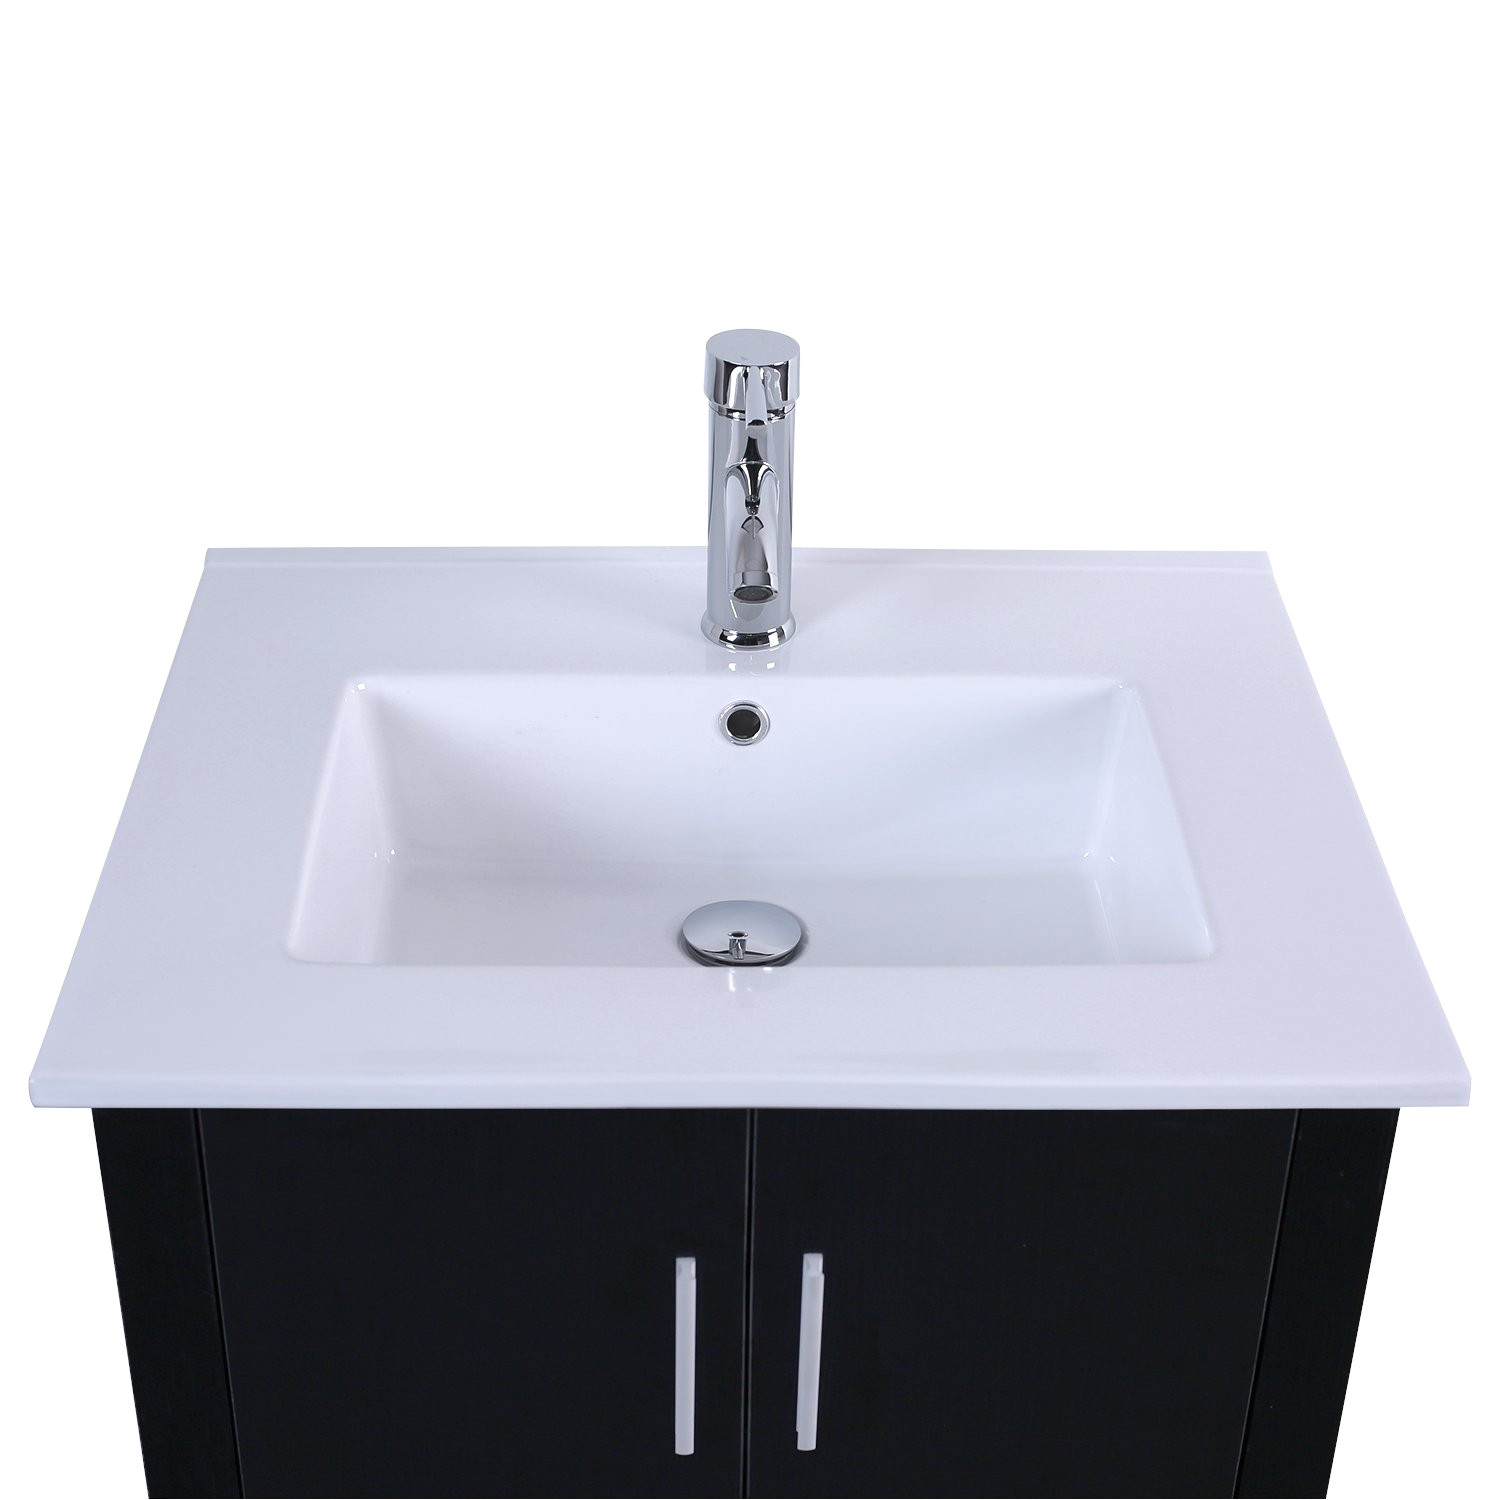 eclife sales promotion 24 modern bathroom vanity and sink combo stand cabinet and white ceramic with overflow vessel sink top and water saved chrome